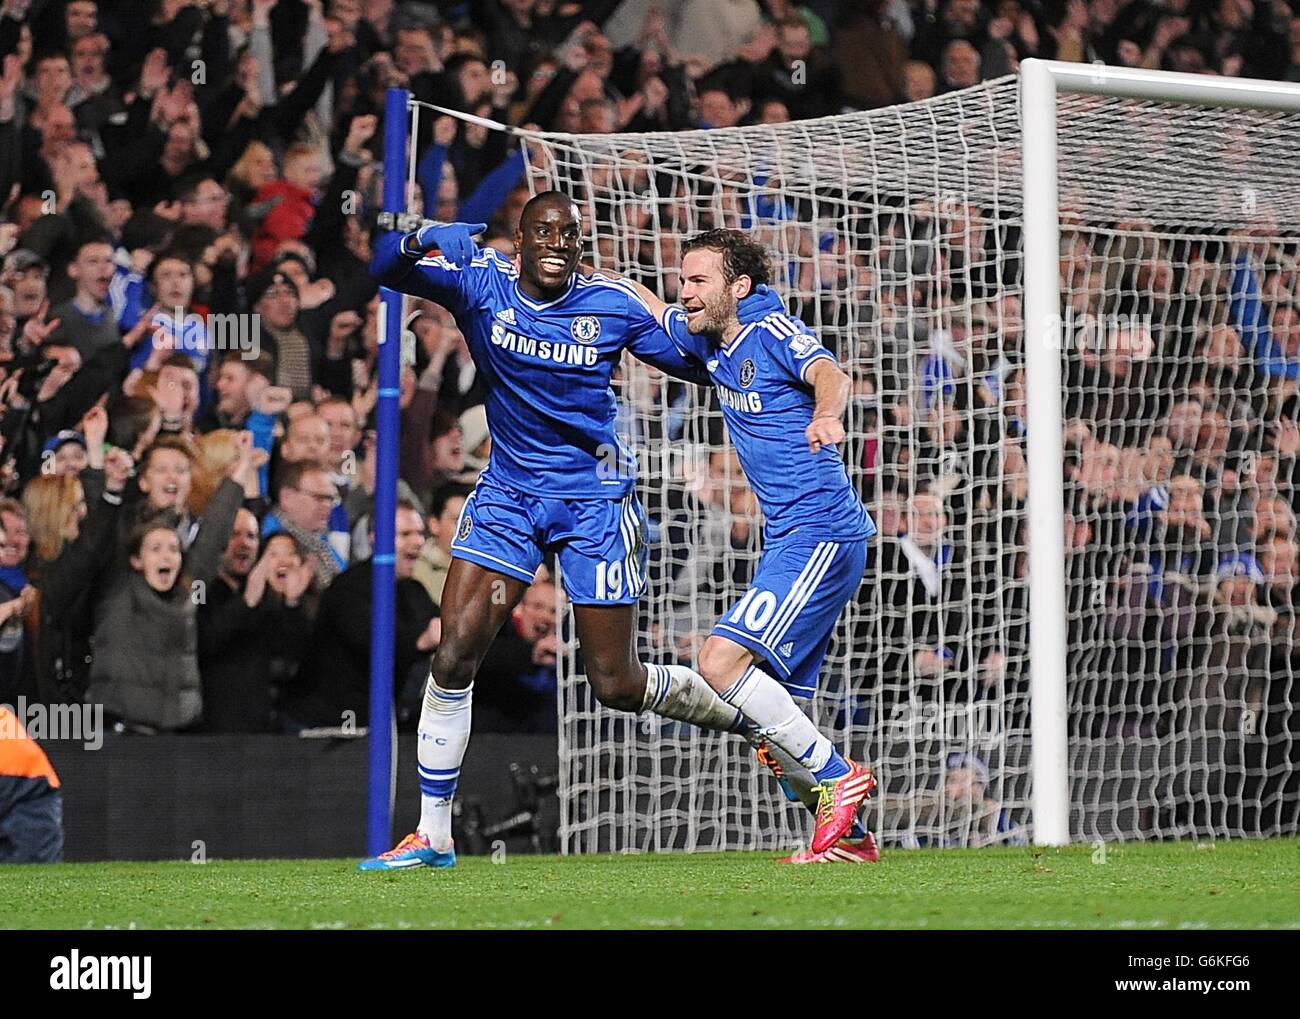 Chelsea's Demba Ba (left) celebrates with his team-mate Juan Mata (right) after scoring his team's third goal Stock Photo